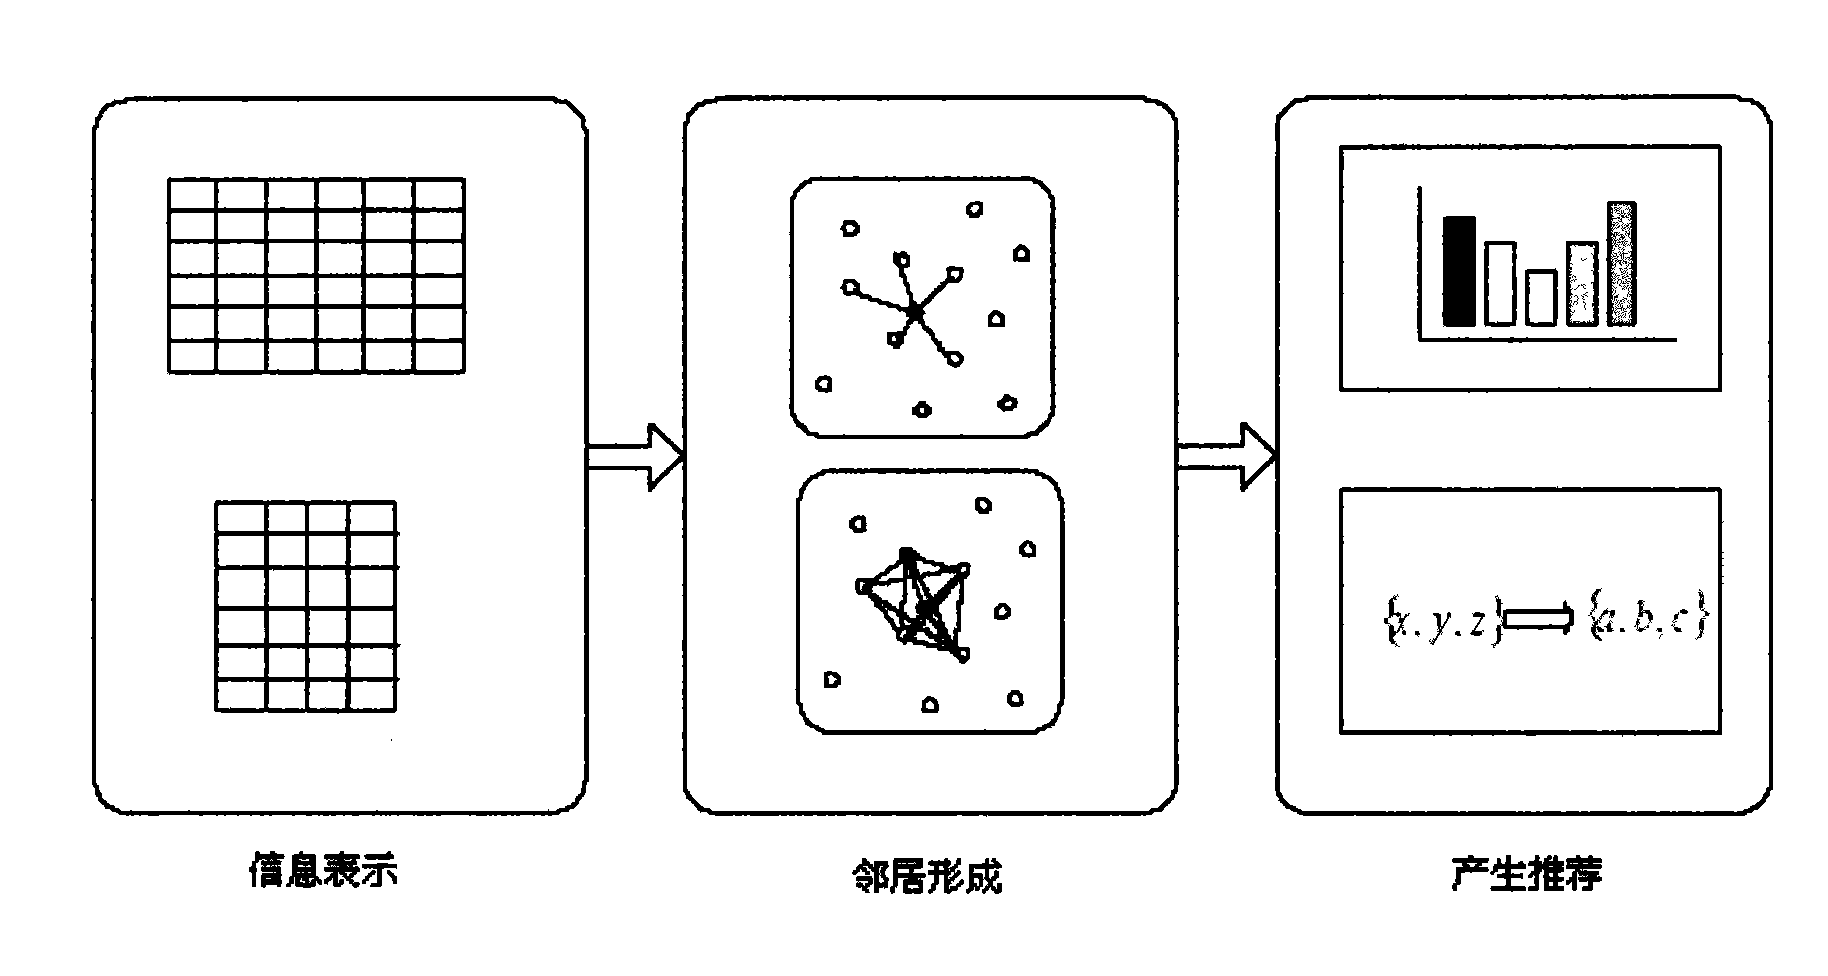 Collaborative filtering recommending method and system based on client characteristics